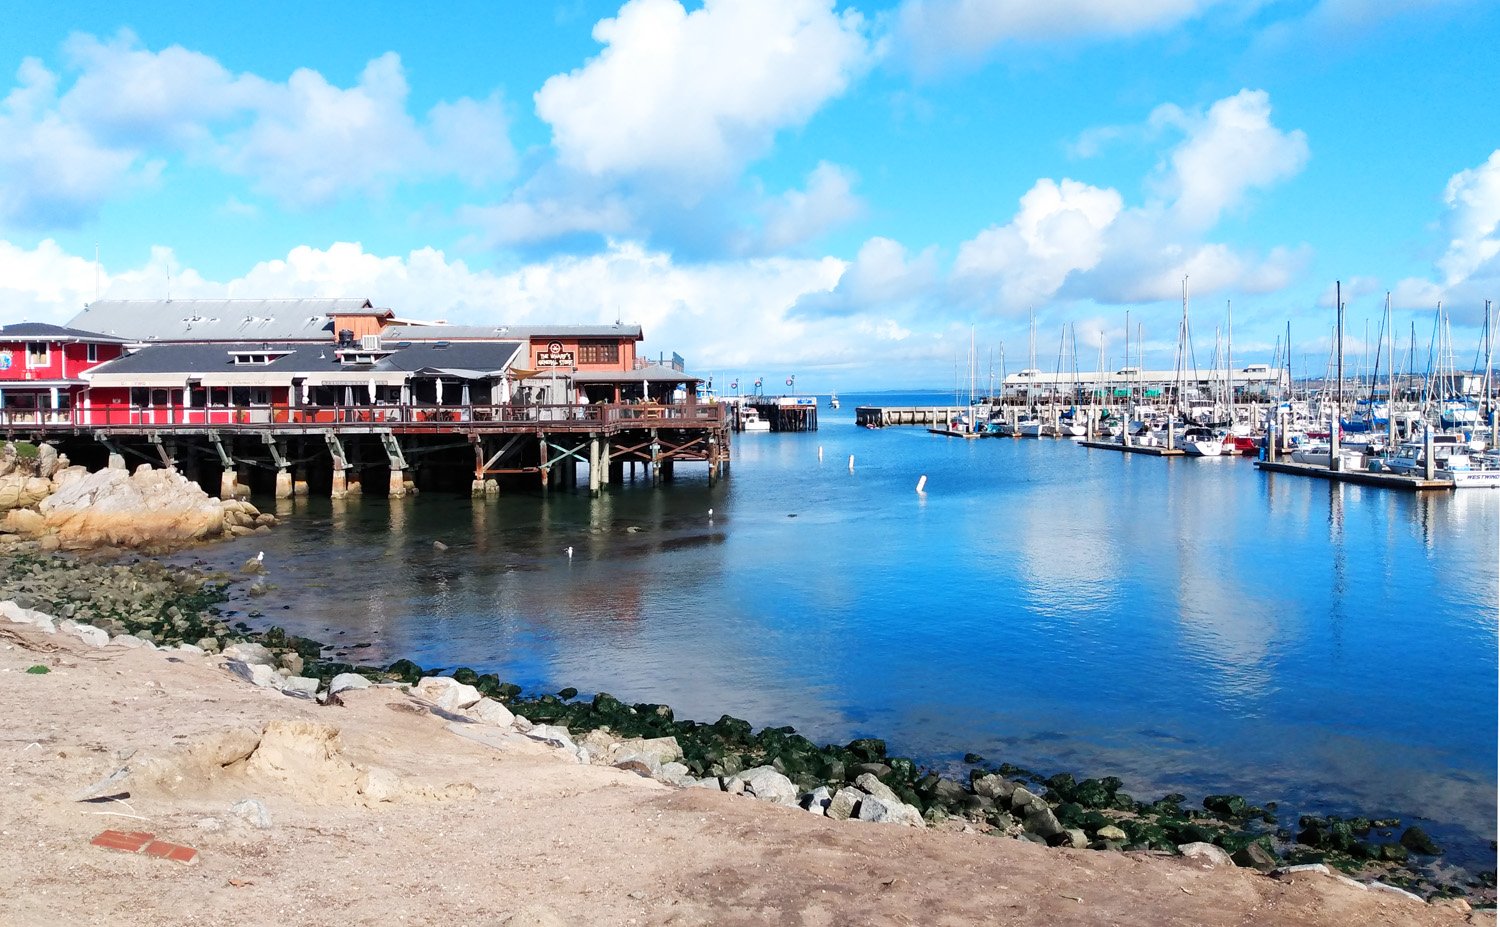 Monterey is a bougie area near the ocean with a great Aquarium and some wildlife watching excursions. 